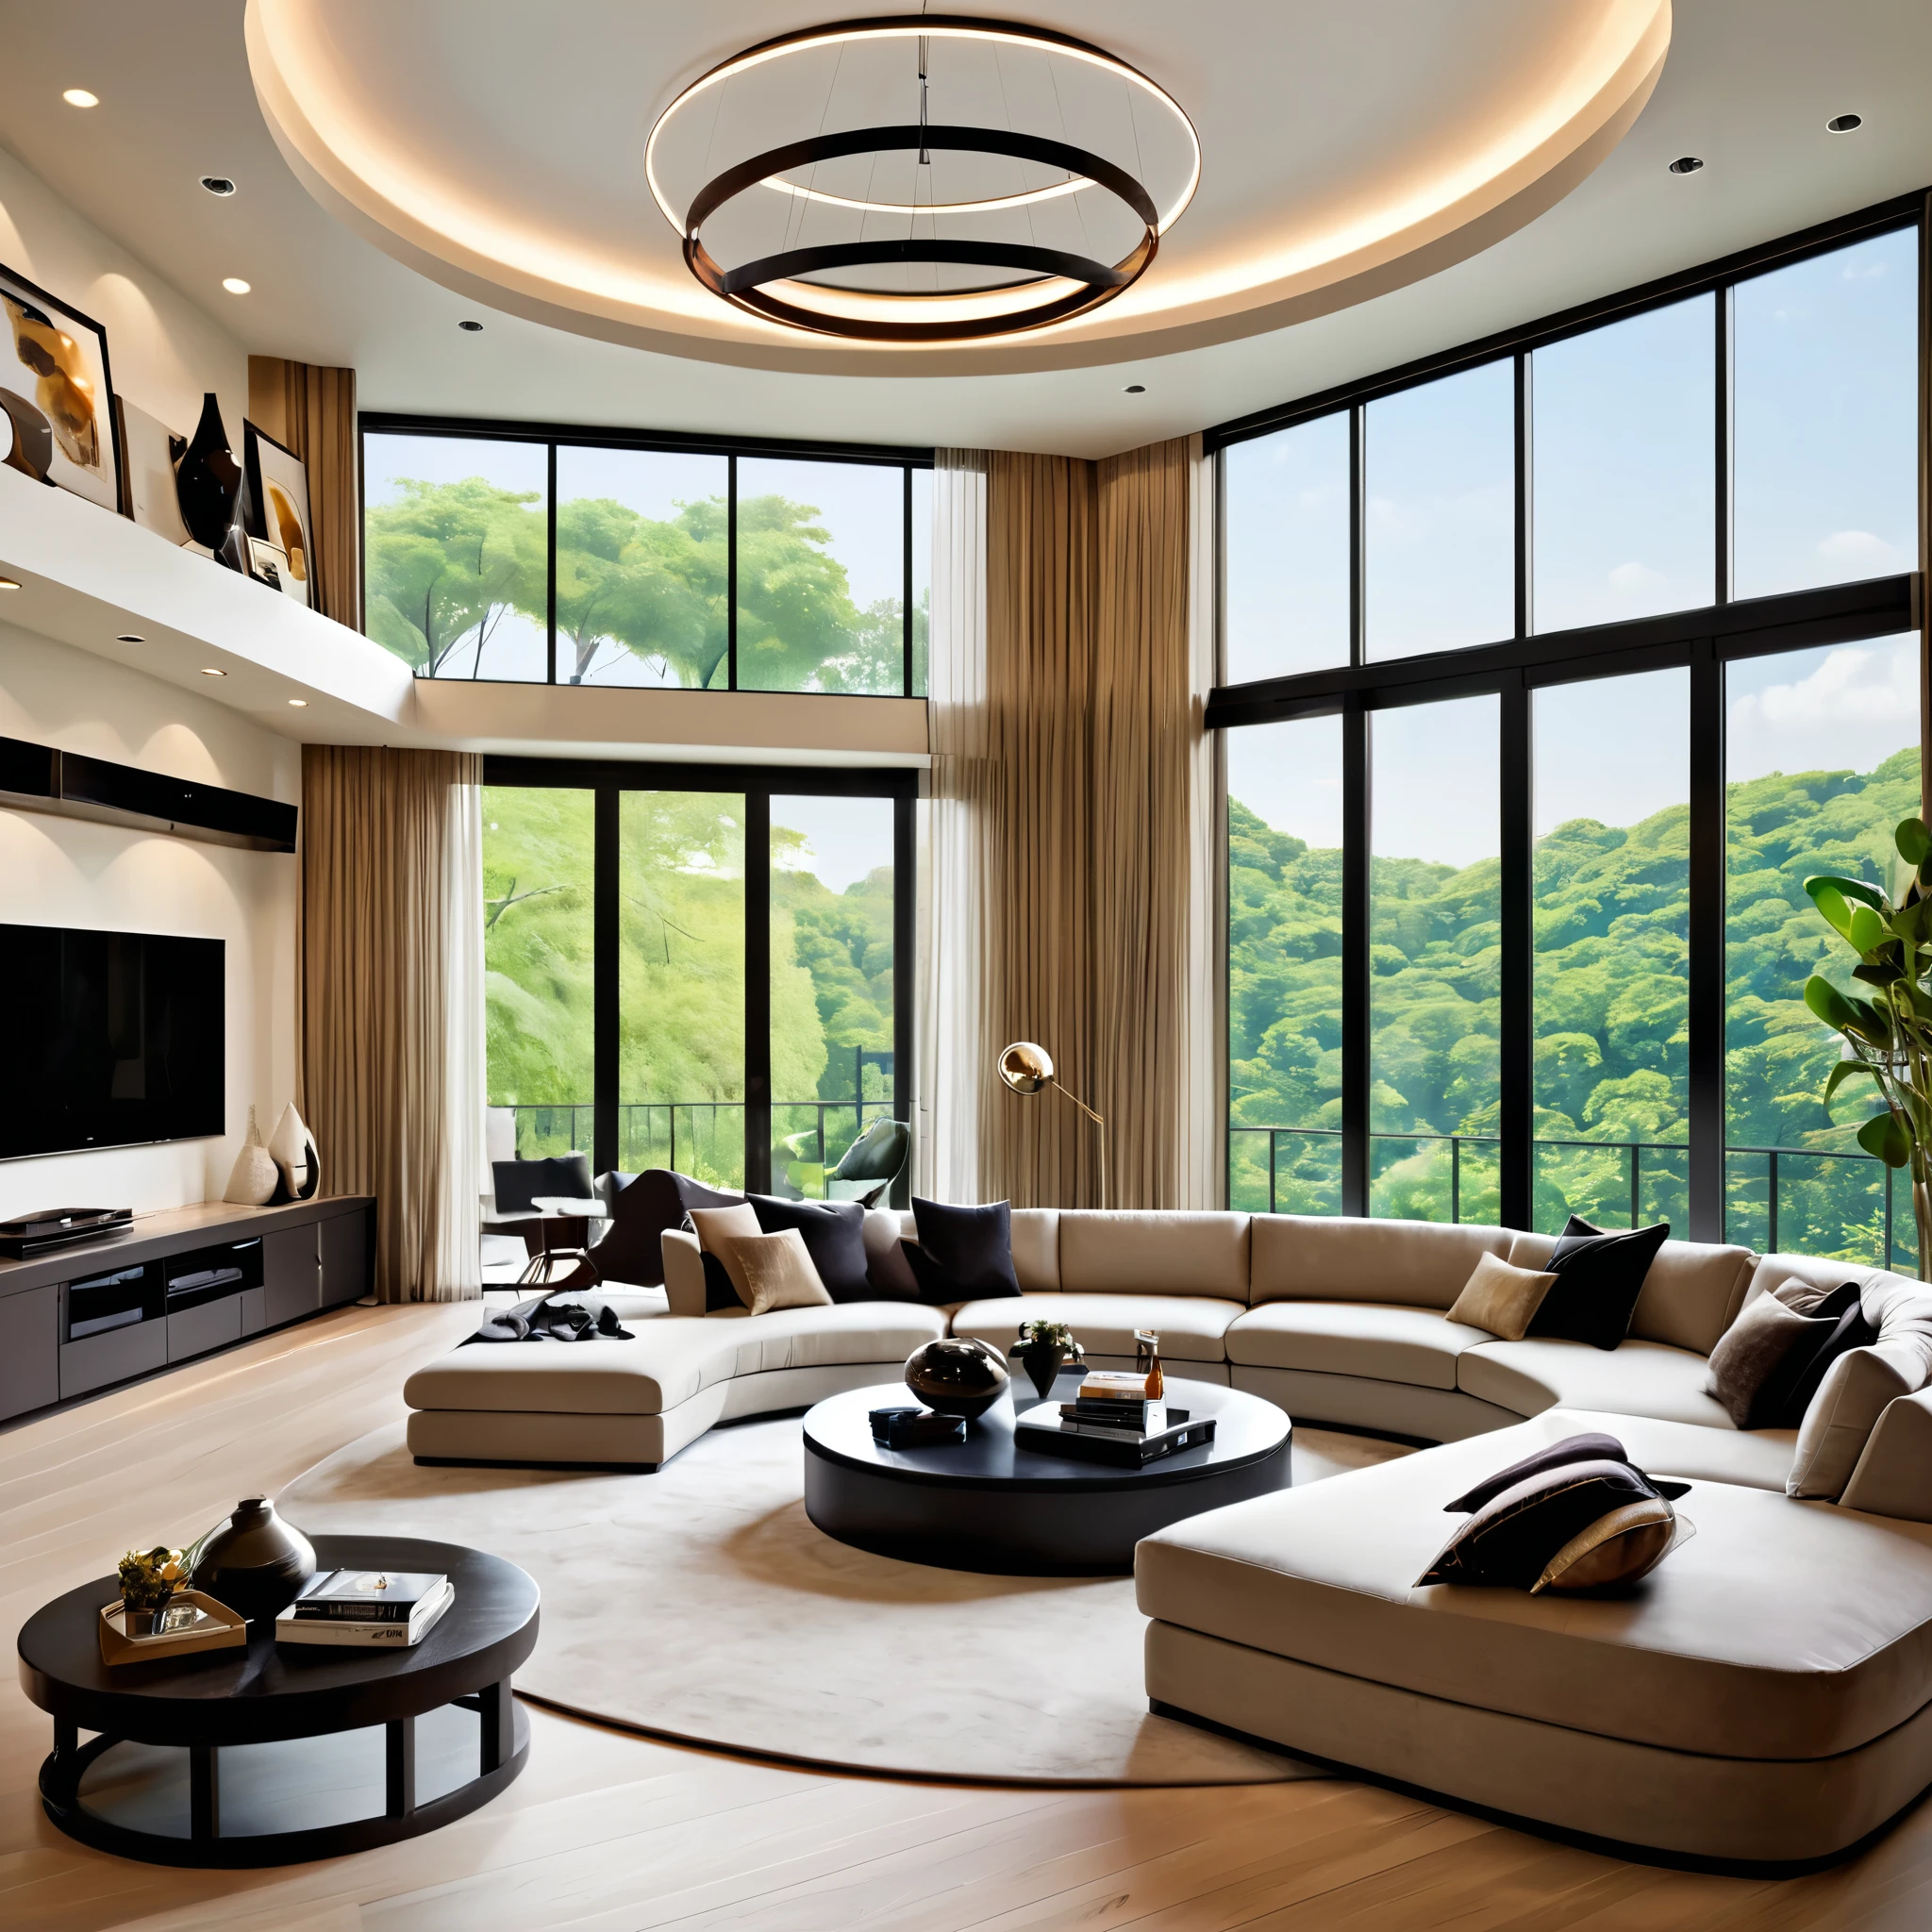 Design a luxurious and modern living room with high ceilings and a sophisticated aesthetic. The room features a large sectional sofa with a mix of neutral and dark pillows, a stylish round coffee table, and a sleek entertainment center with built-in shelving. The space is illuminated by elegant circular pendant lights hanging from the ceiling. Large floor-to-ceiling windows allow natural light to flood the room, highlighting the contemporary decor and creating an inviting atmosphere. Add a few decorative items and books on the shelves to enhance the sophisticated feel.